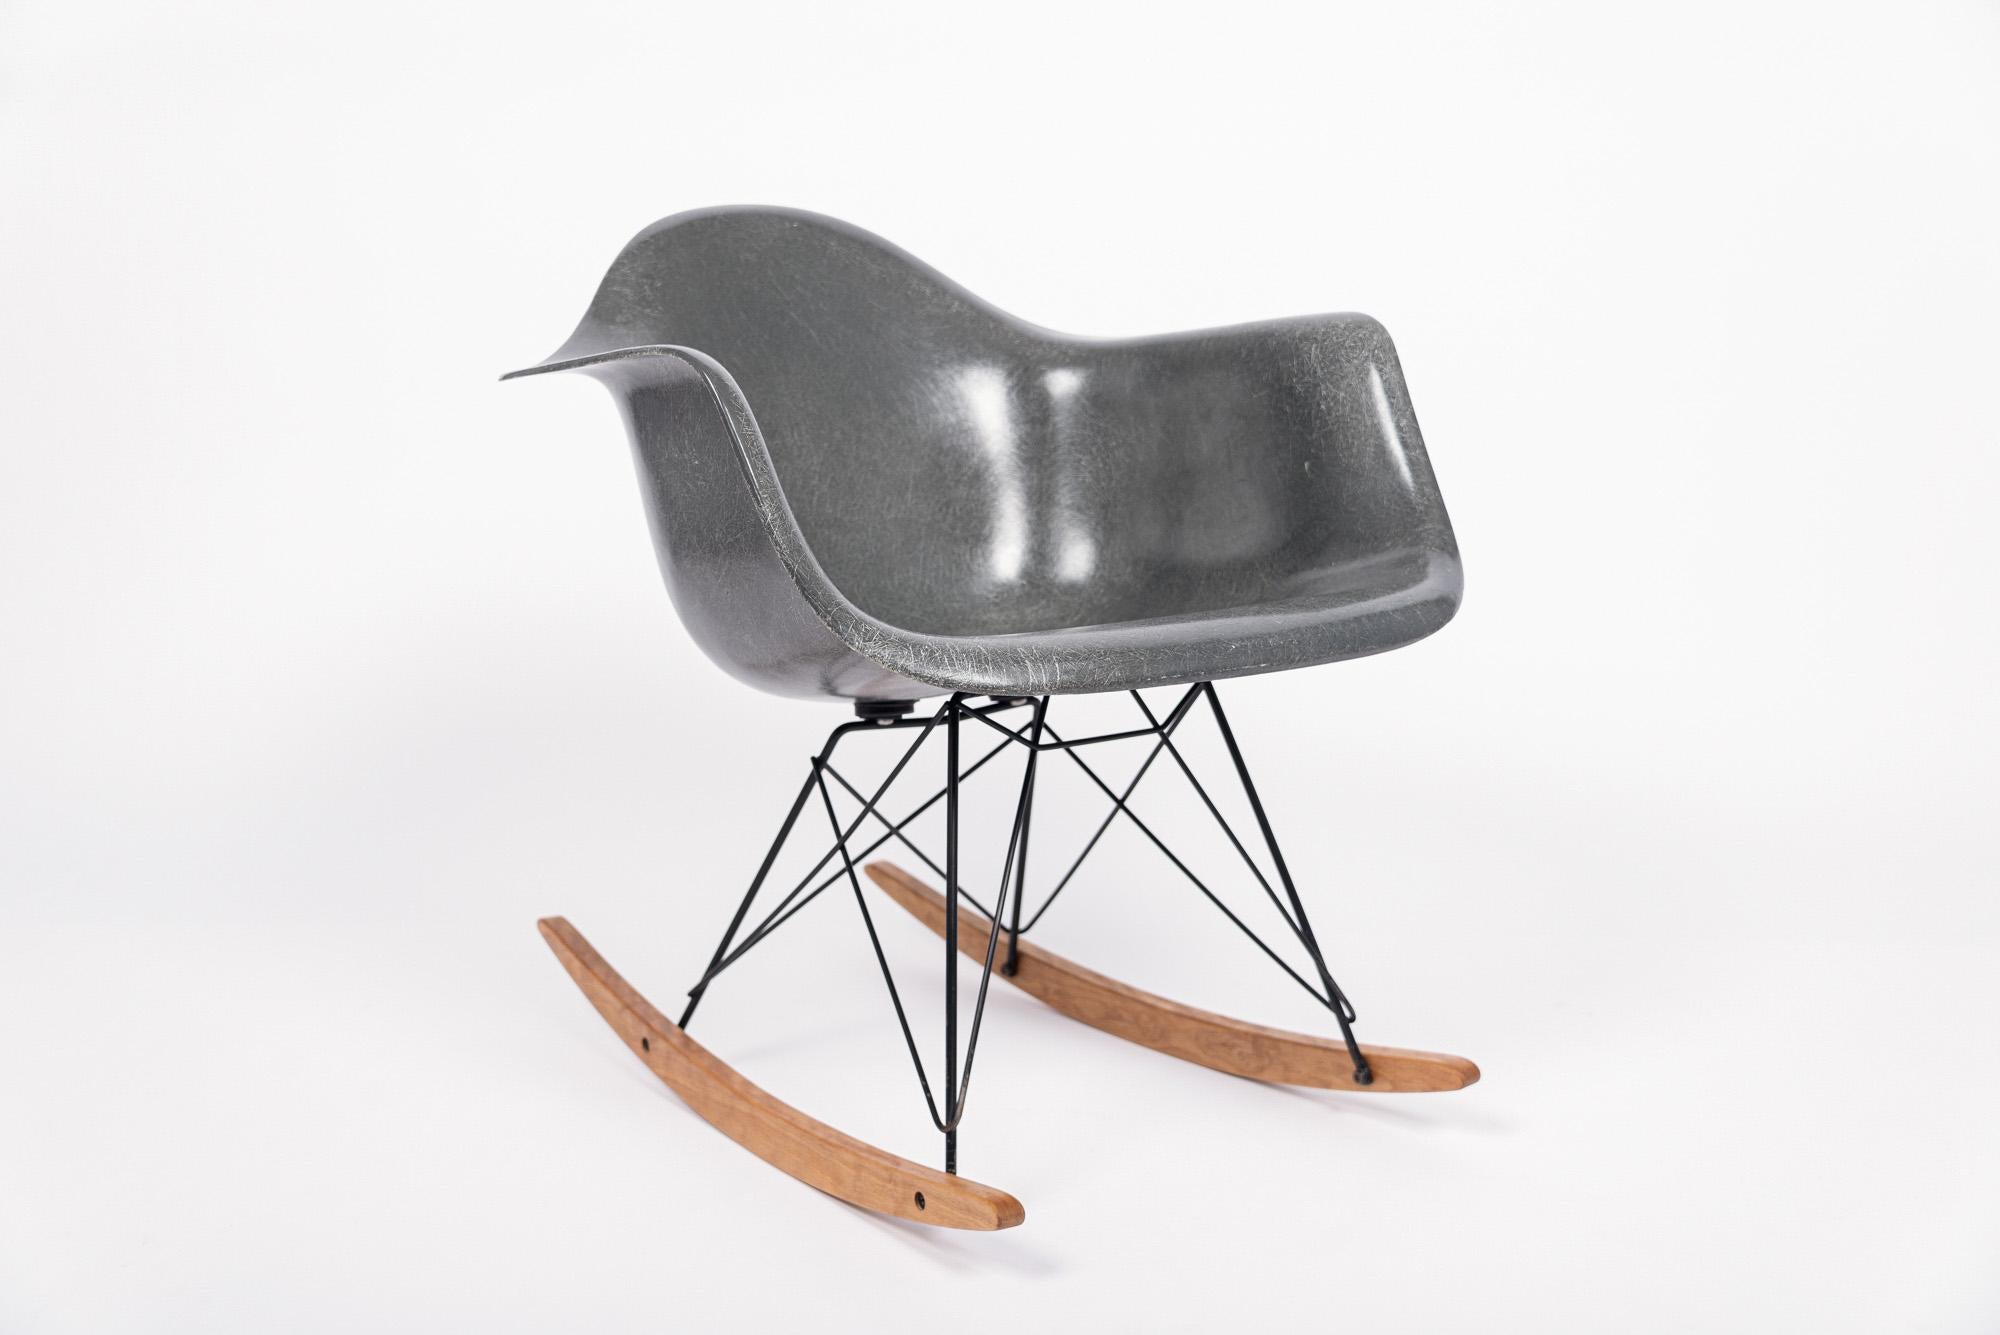 The iconic RAR chair - Rocking (R) Arm (A) Chair on Rod (R) Base - was designed by Charles & Ray Eames for Herman Miller in 1950 and launched as one of the original 5 base options for the new fiberglass chair model. The original RAR has remained a